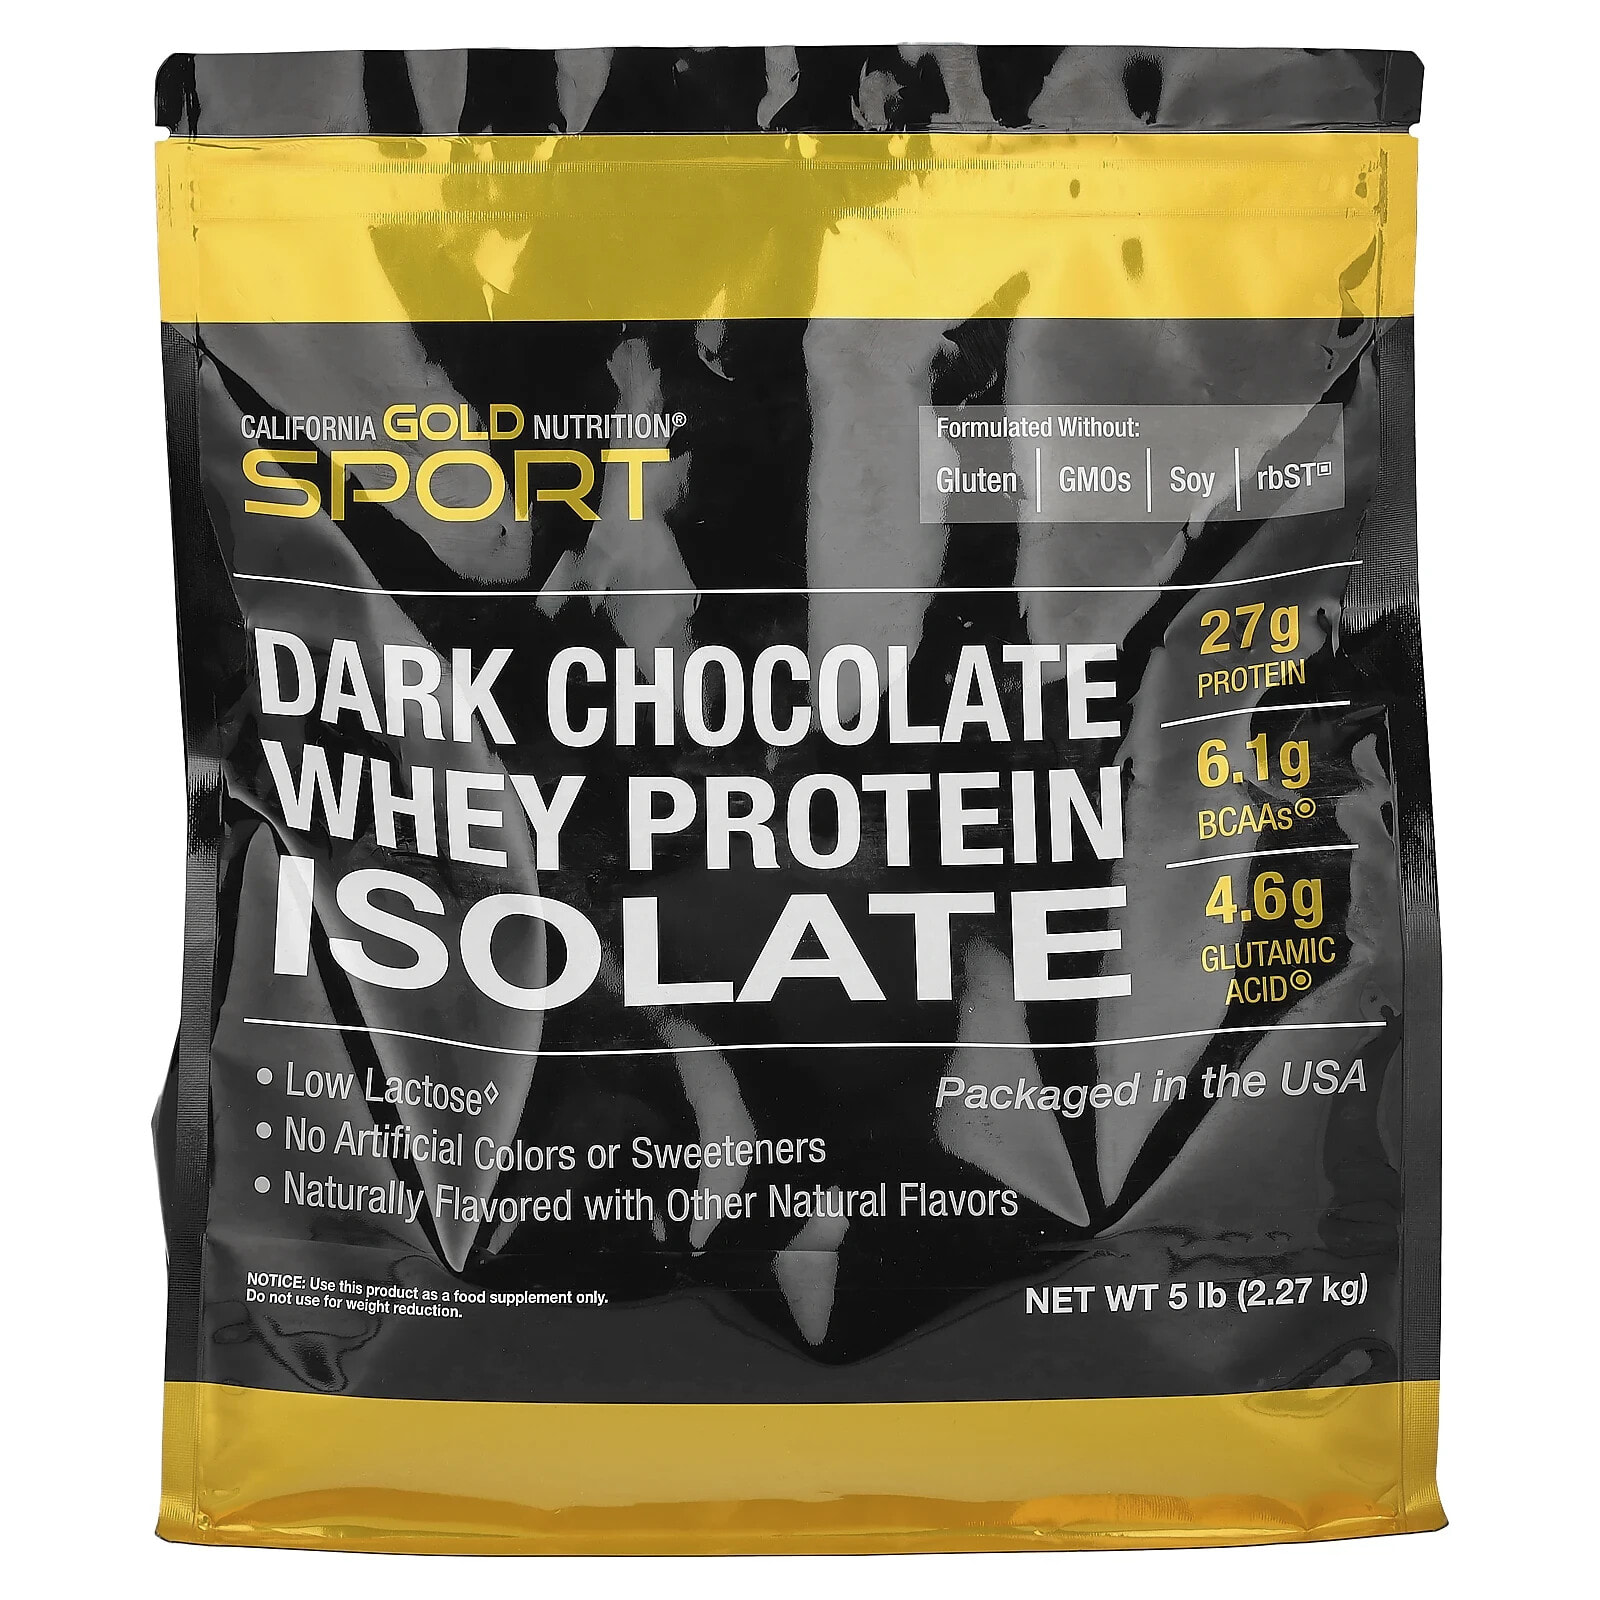 California Gold Nutrition, 100% Whey Protein Isolate, Very Vanilla Flavor, 2 lbs (907 g)